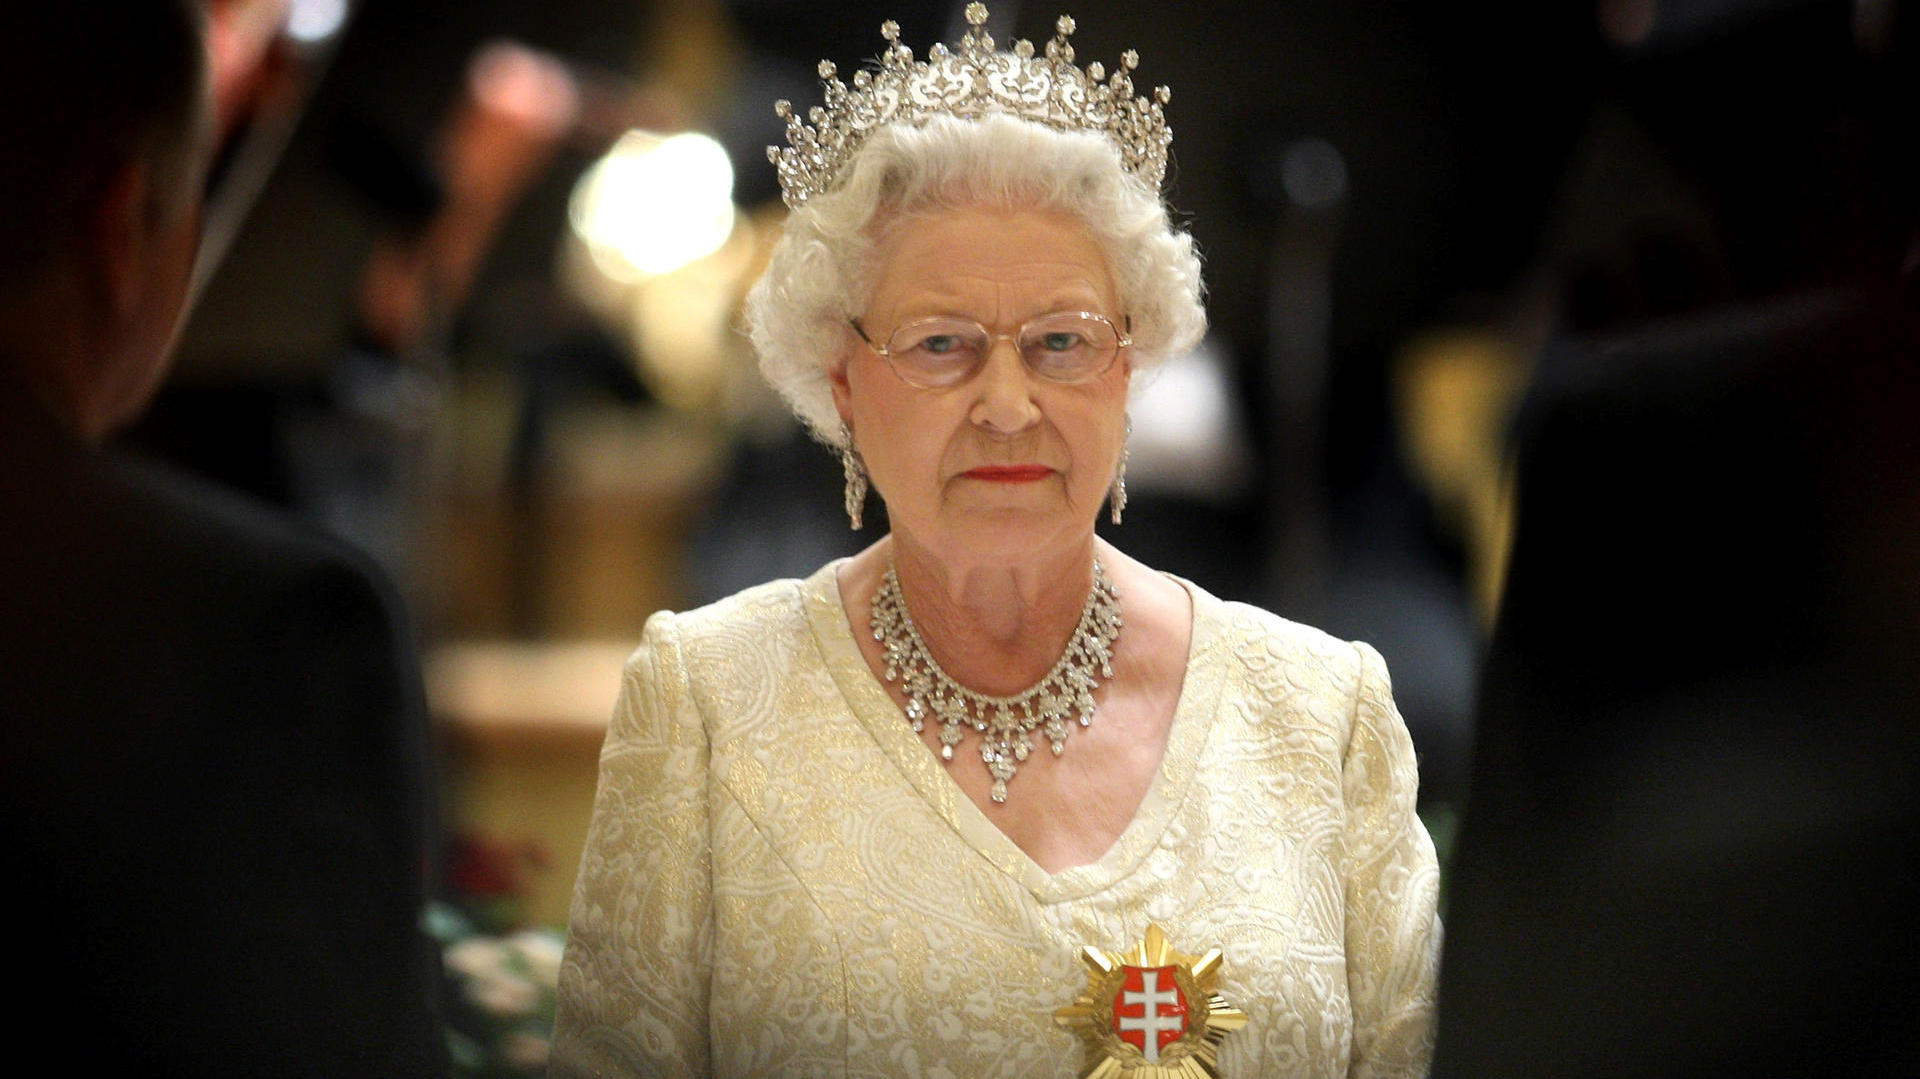 British government launches inquiry into leak of plans for procedures after queen’s death